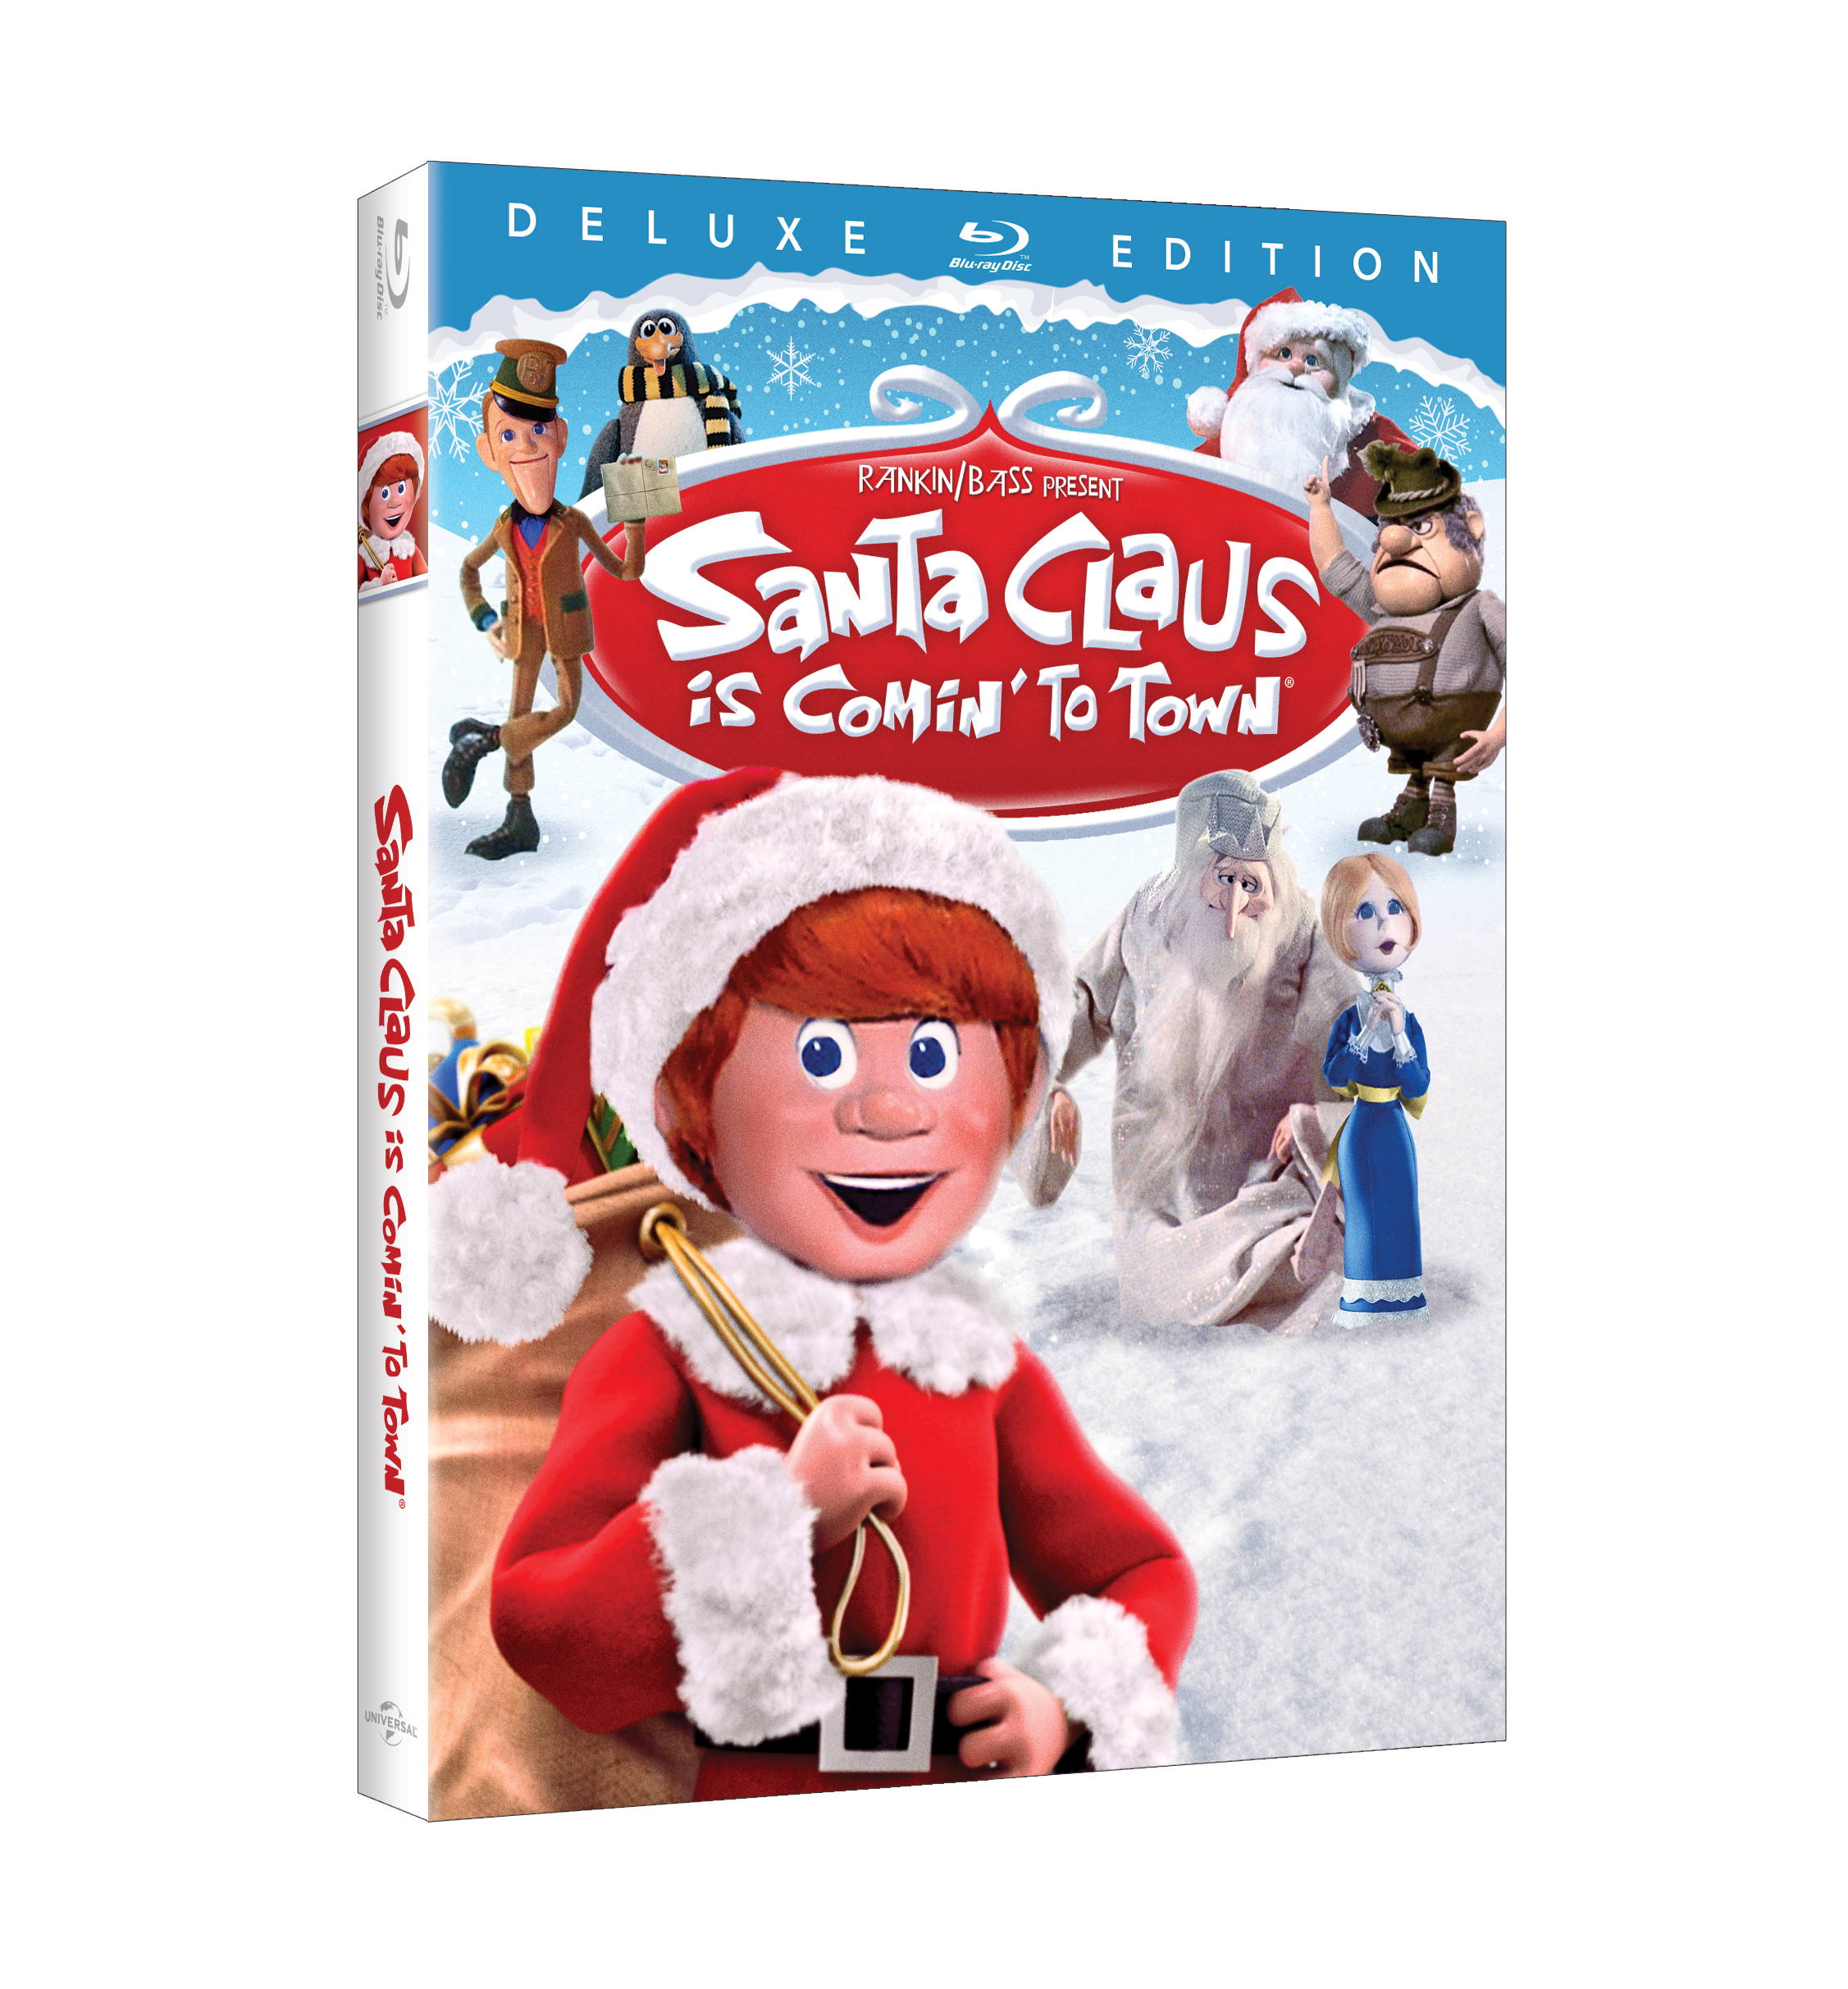 Santa Clause Is Comin' To Town Deluxe Edition Blu-Ray cover (Universal Pictures Home Entertainment)